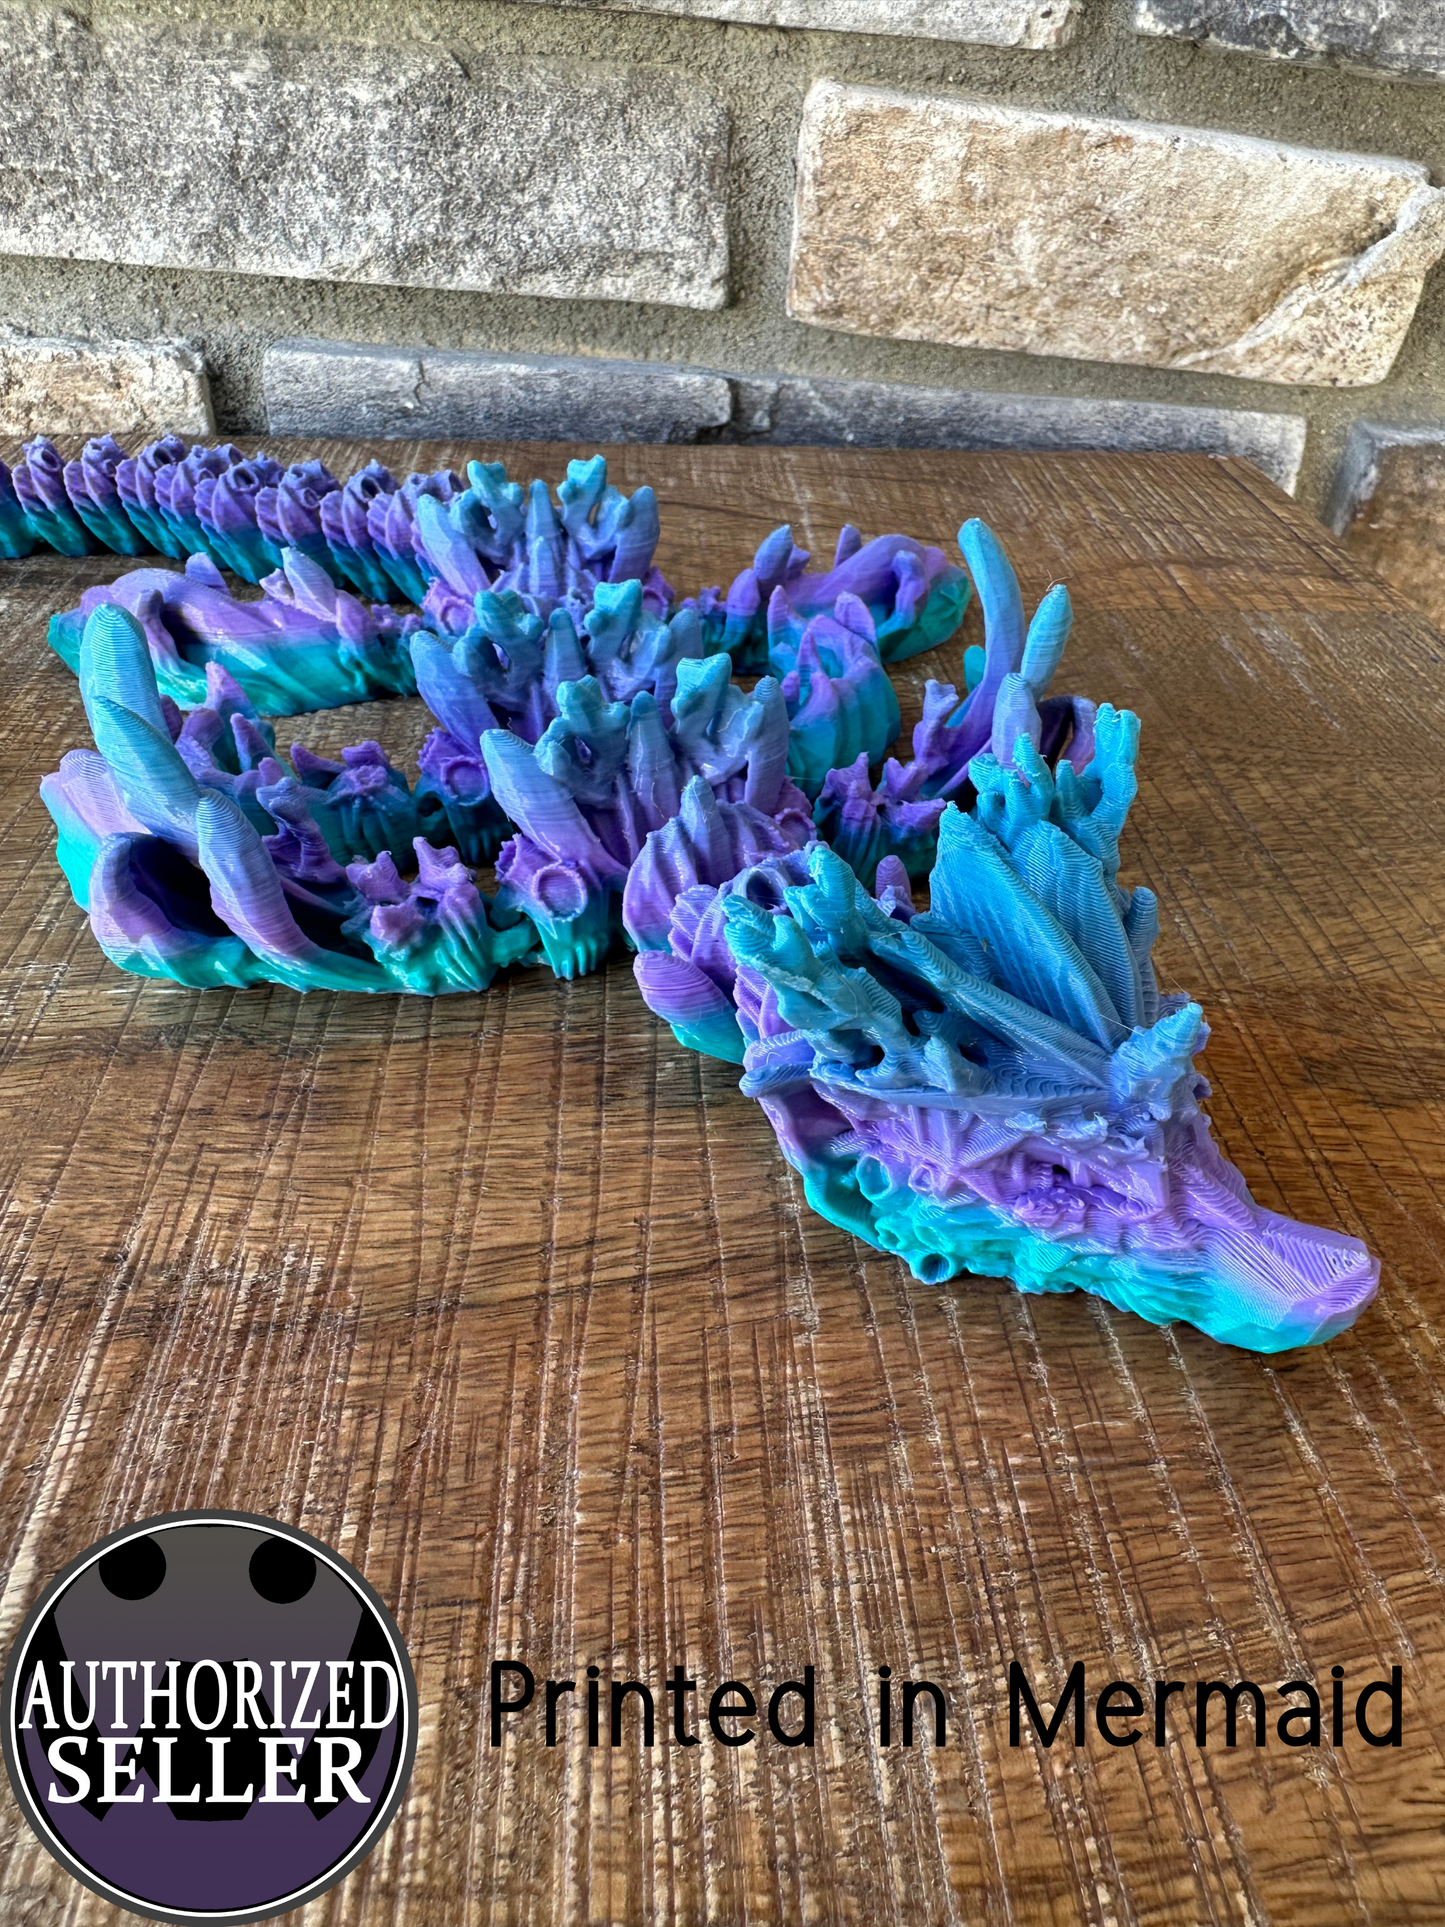 Coral Reef Dragon | 3D Printed | Articulated Flexible | Custom Fidget Toy